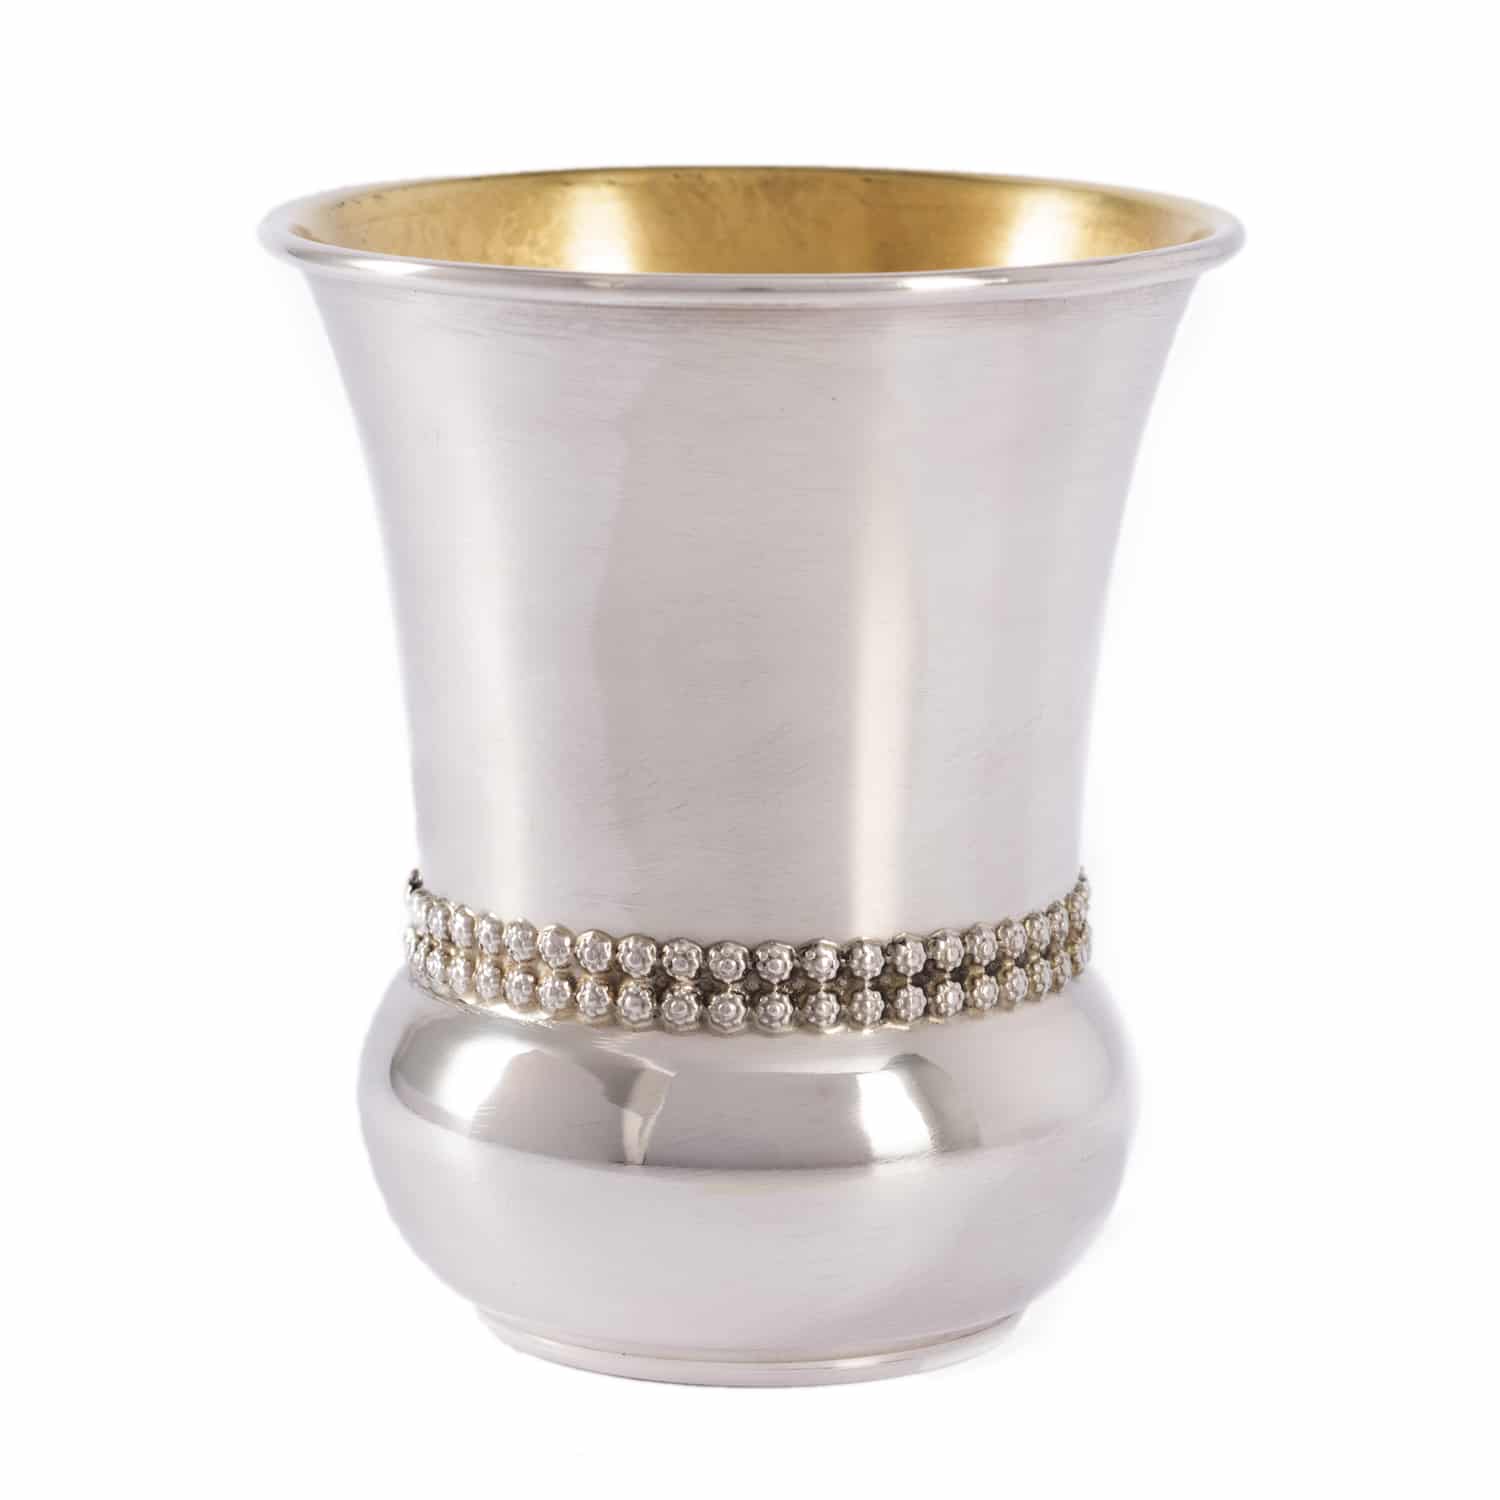 Beads Sterling Silver Kiddush Cup